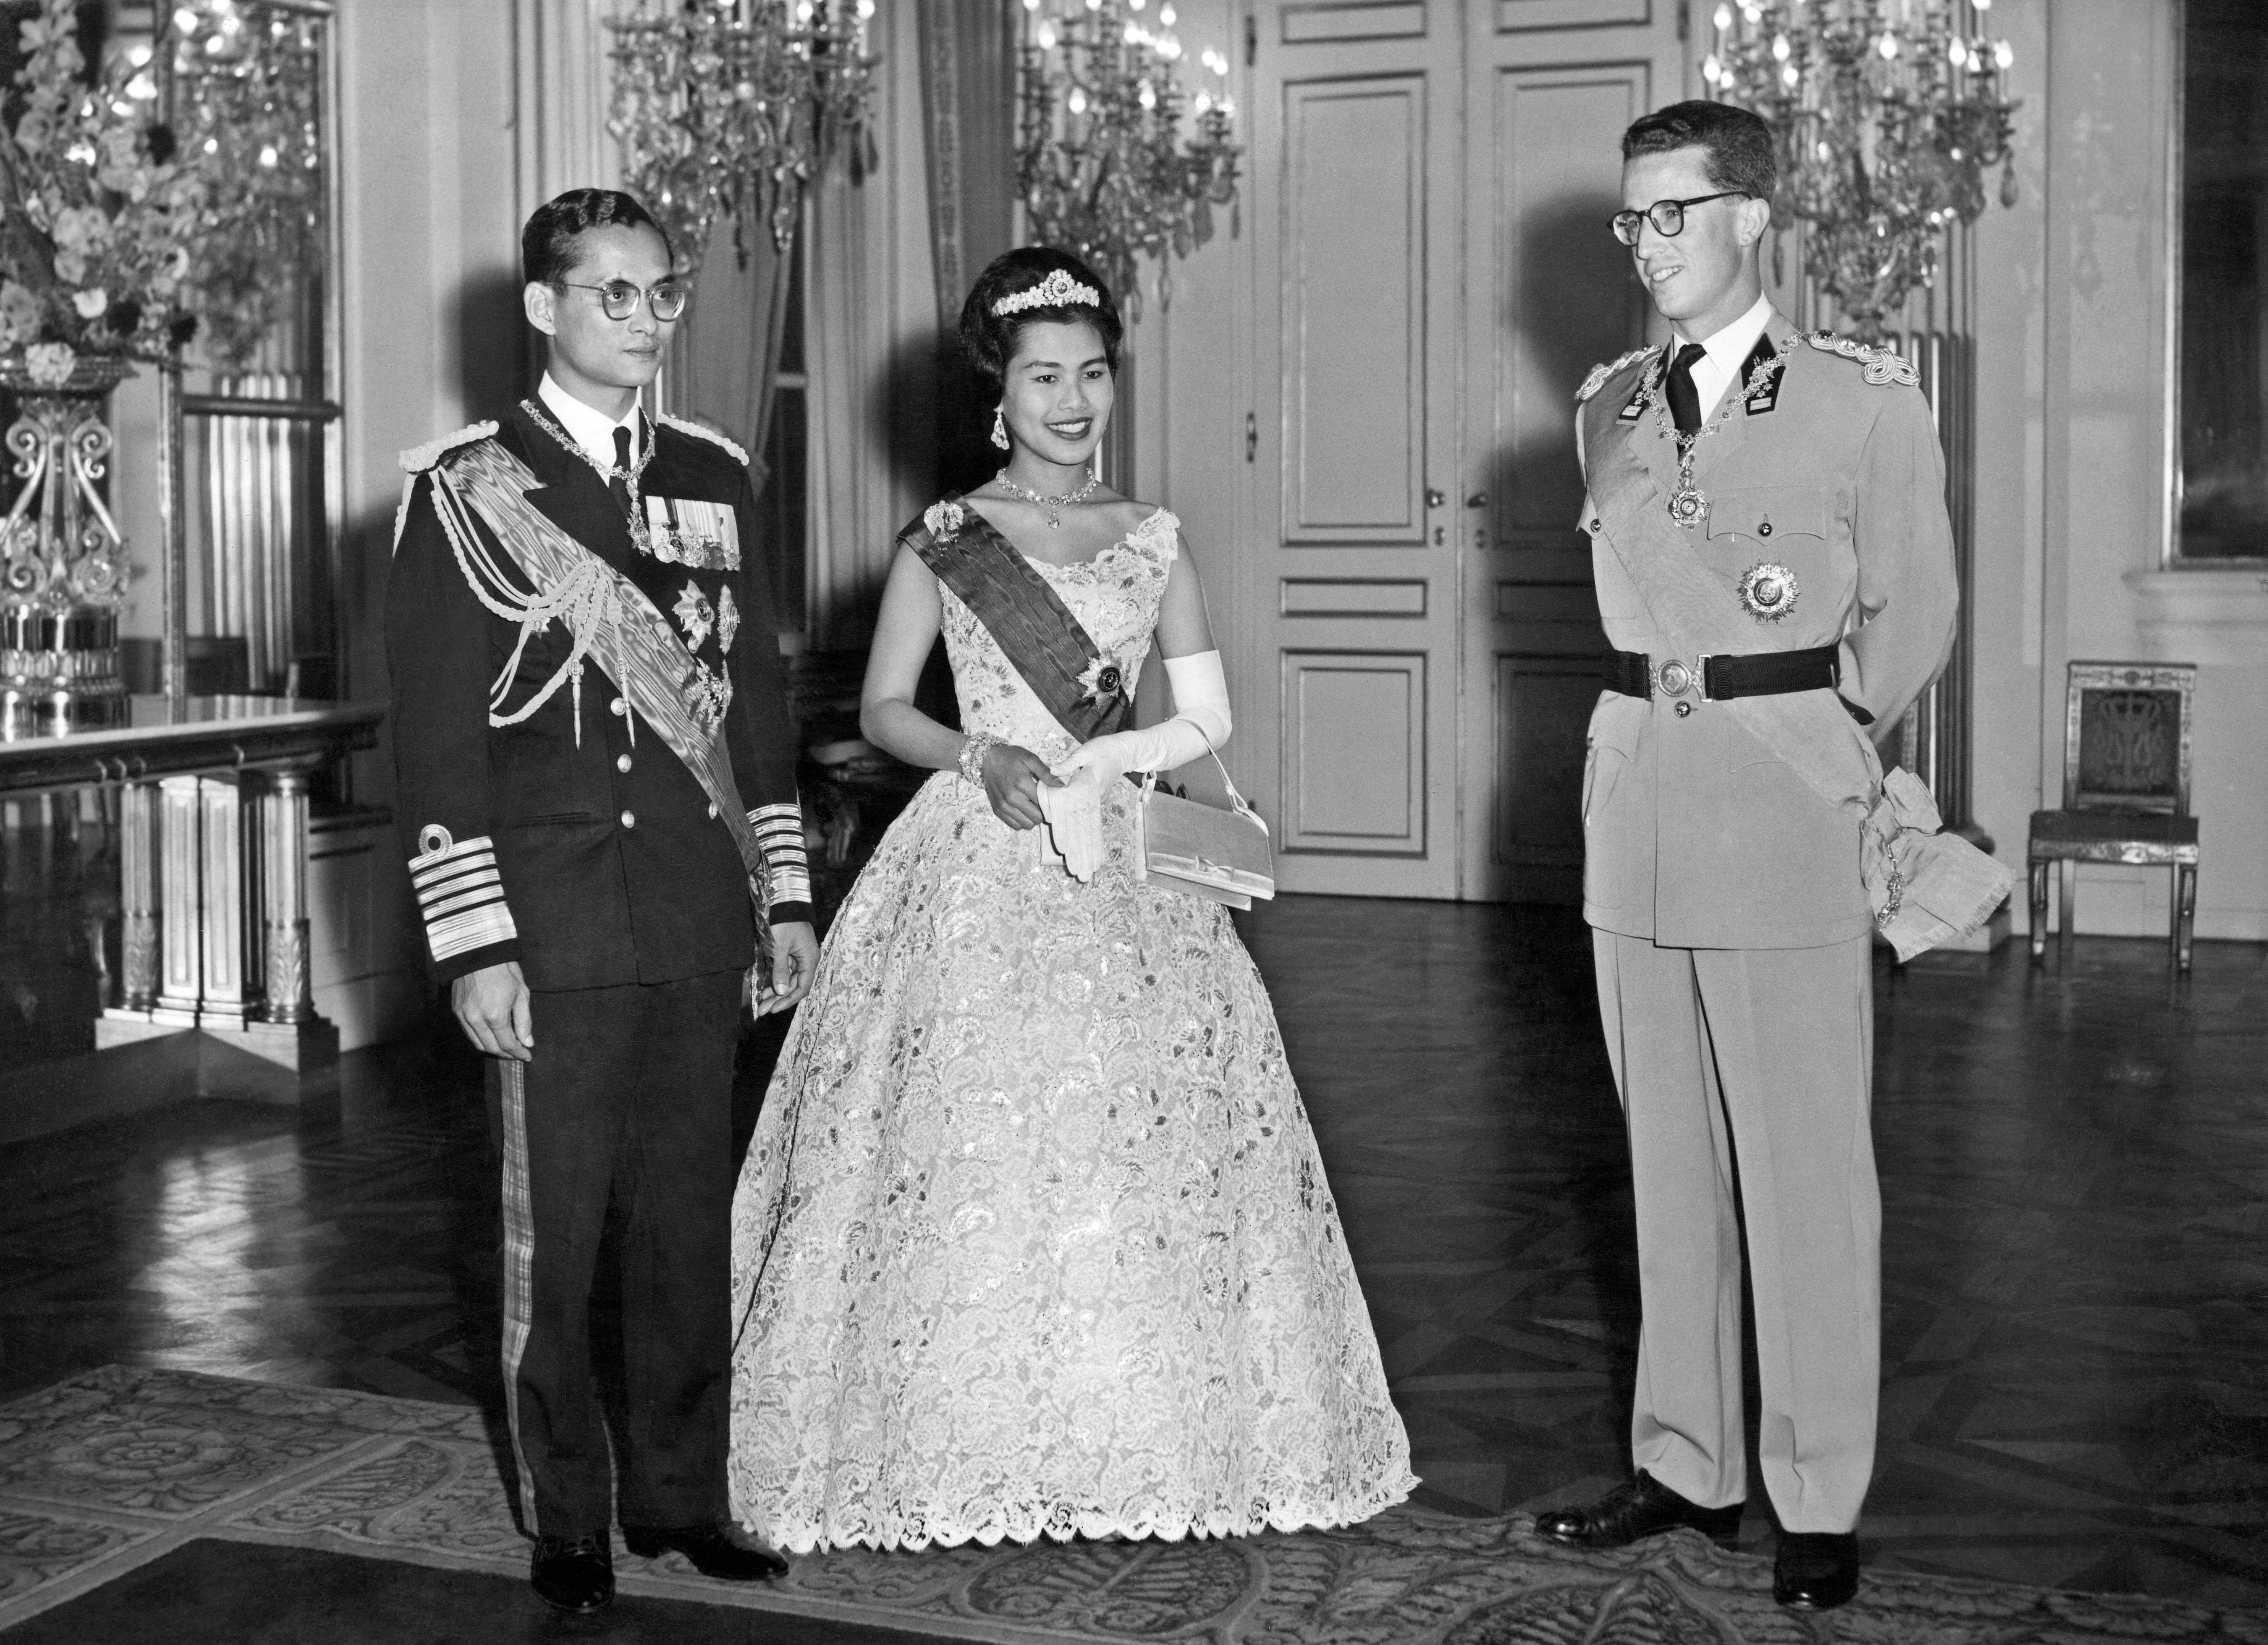 Thai King Bhumibol Adulyadej (L) and Queen Sirikit (C) stand near Belgium King Baudouin I, on October 1960 in Brussels, during their offcil visit to Belgium. / AFP PHOTO / BELGA